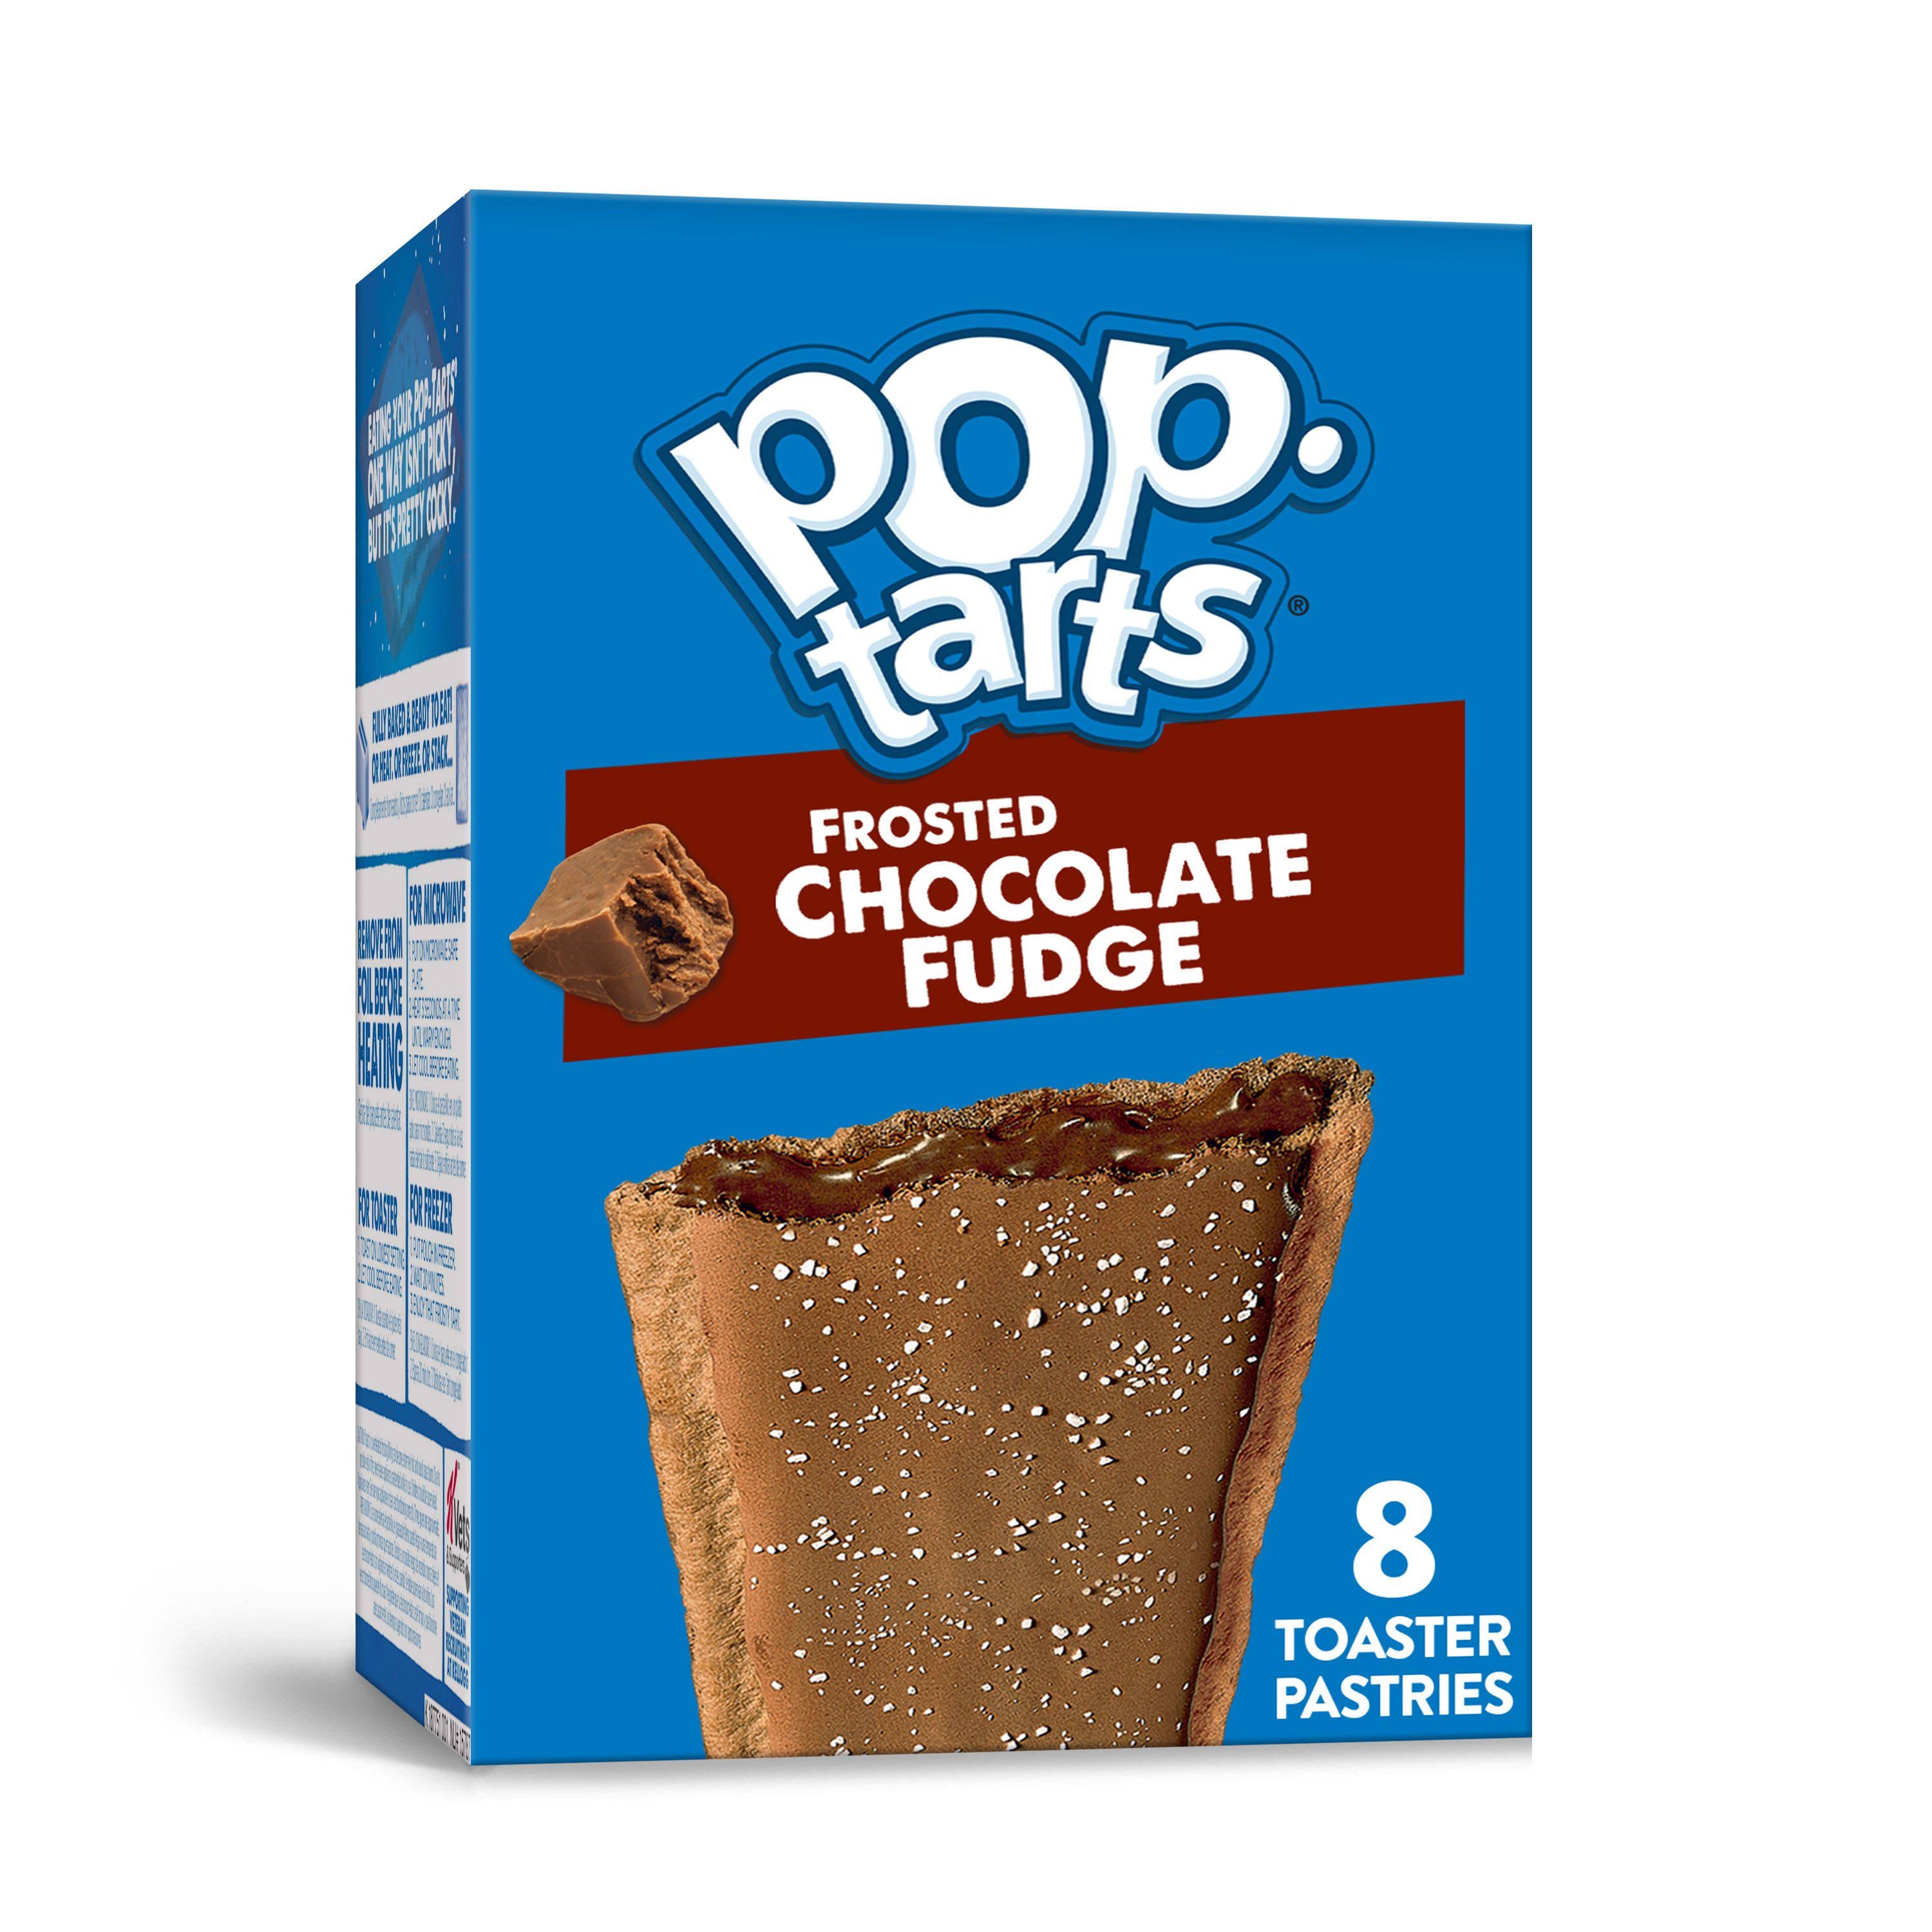 Pop-Tarts Toaster Pastries, Chocolate Fudge, Frosted - 8 toaster pastries, 13.5 oz